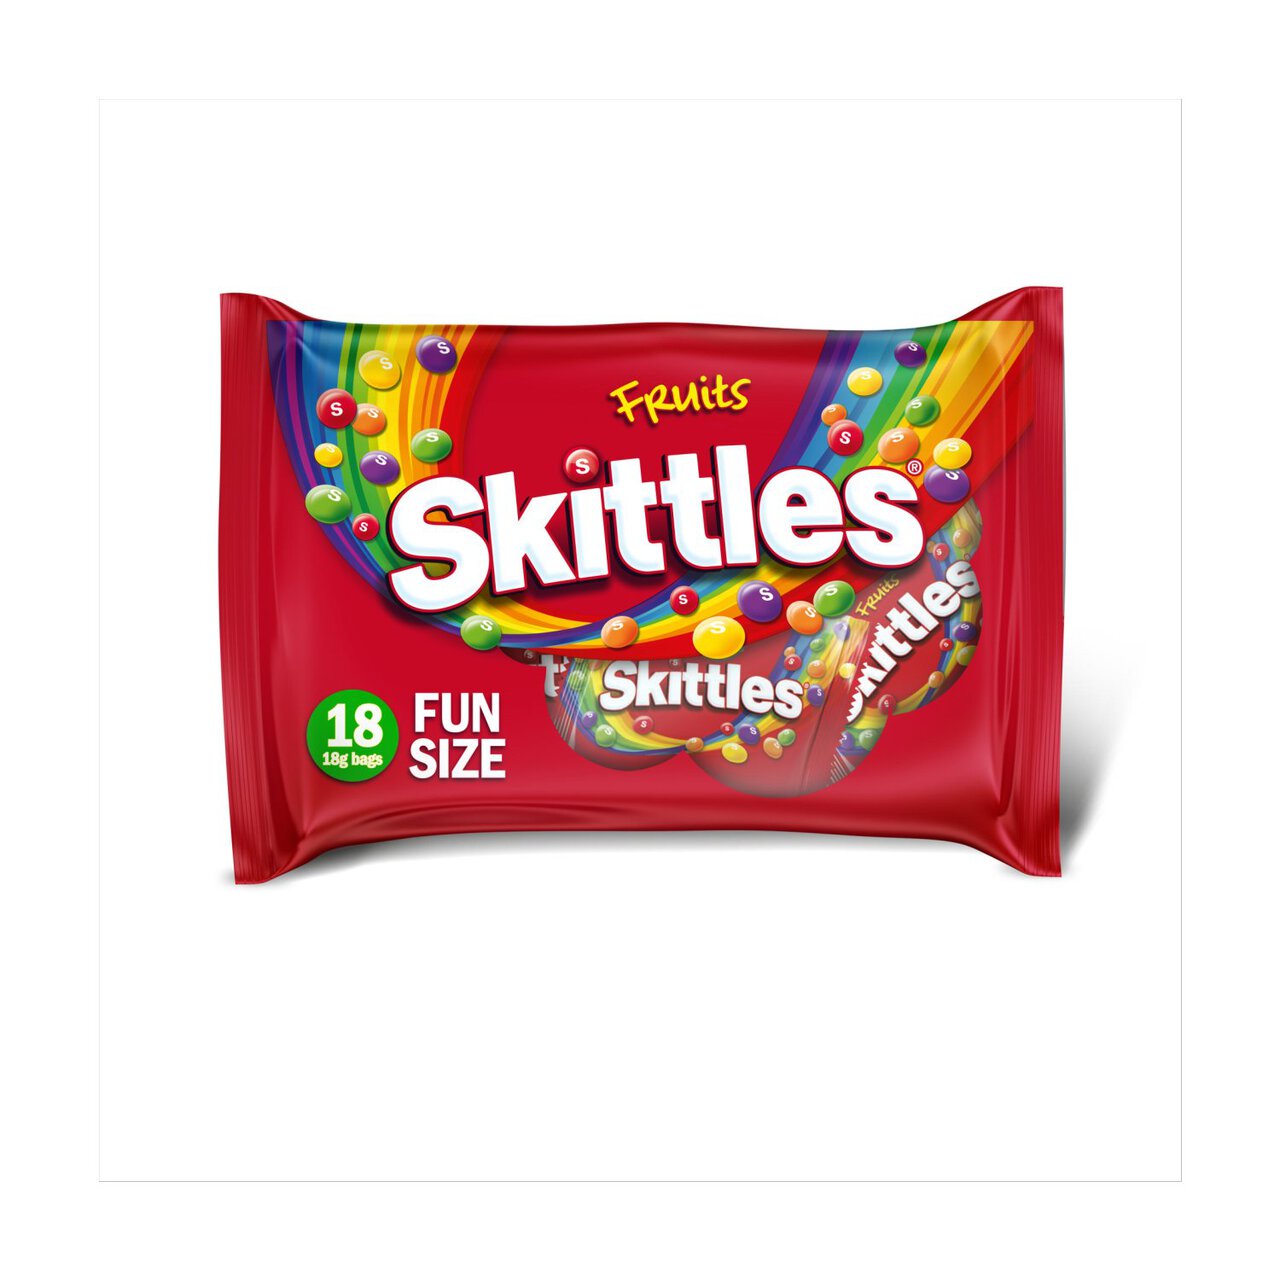 Skittles Vegan Chewy Sweets Fruit Flavoured Funsize Bags Multipack 18x18g 324g